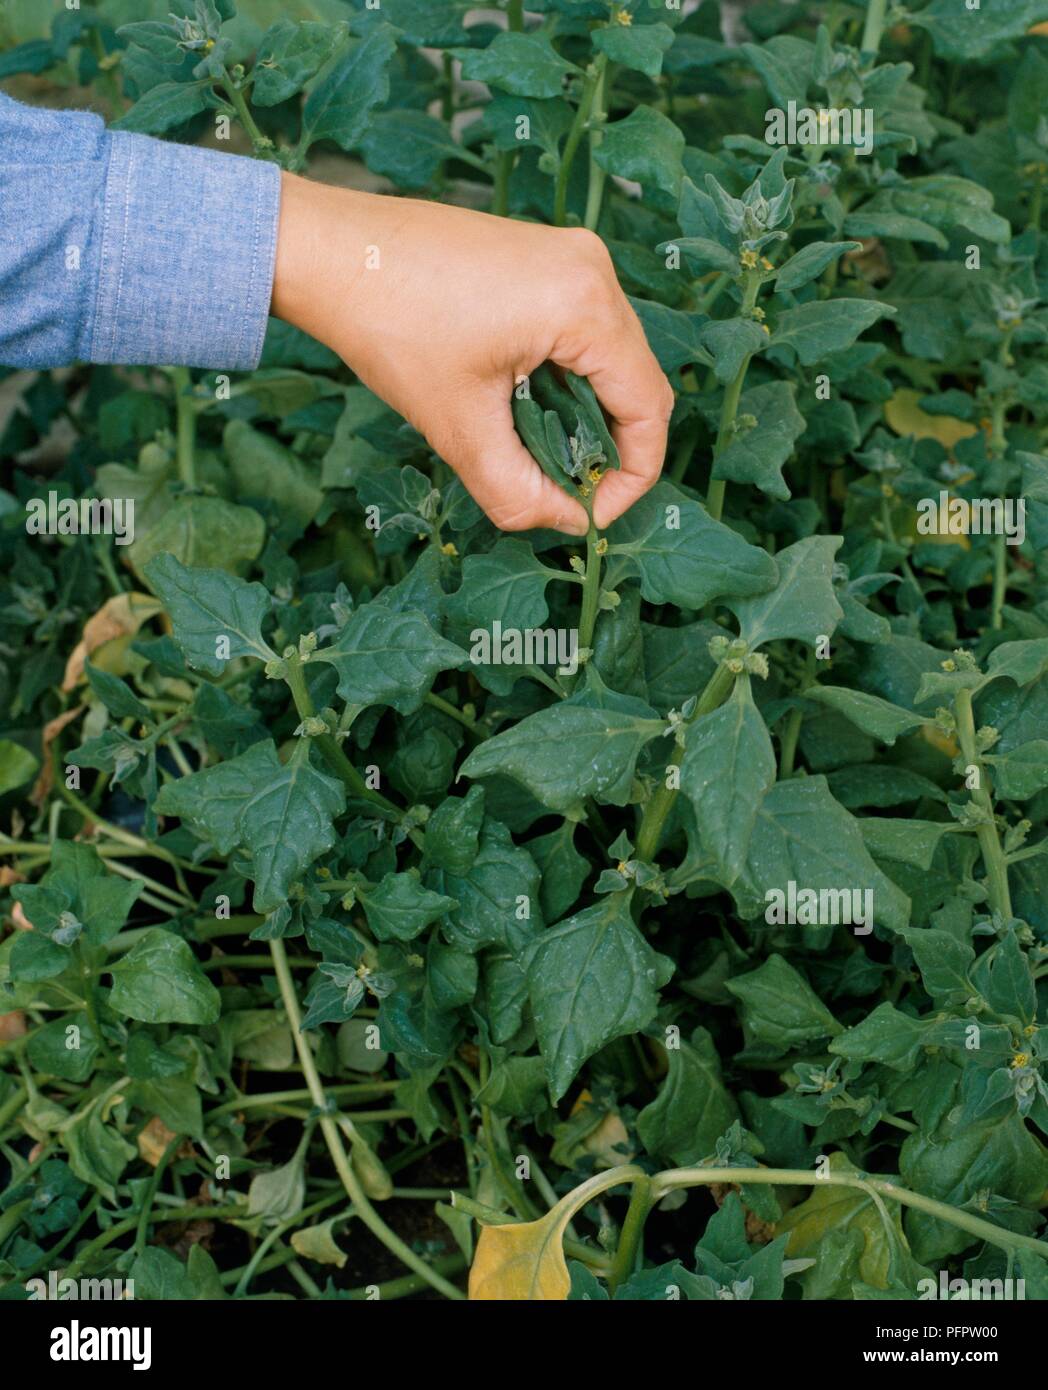 Person picking young leaves and tips off stems of Tetragonia tetragonioides (New Zealand spinach), close-up Stock Photo